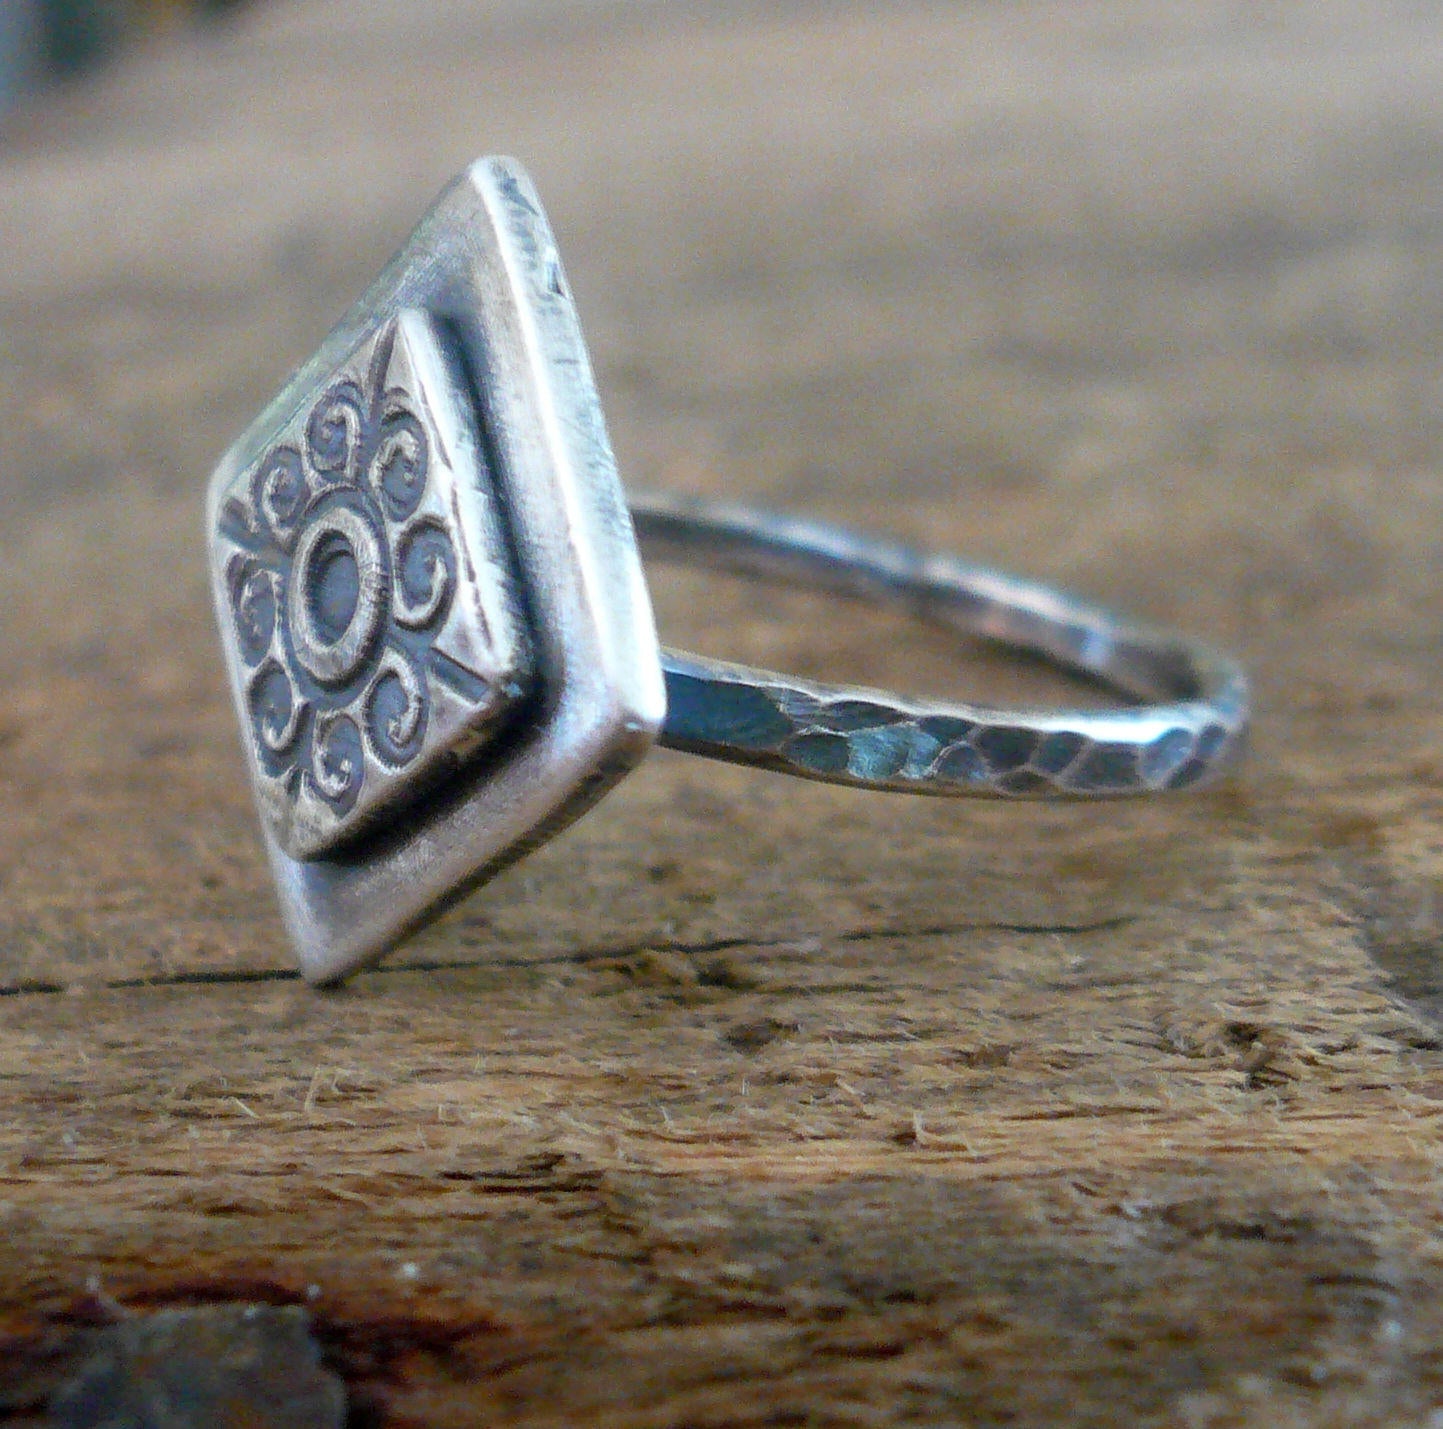 French Quarter Ring - Sterling & Fine Silver Oxidized Hammered Ring. Hand made by jNic Designs